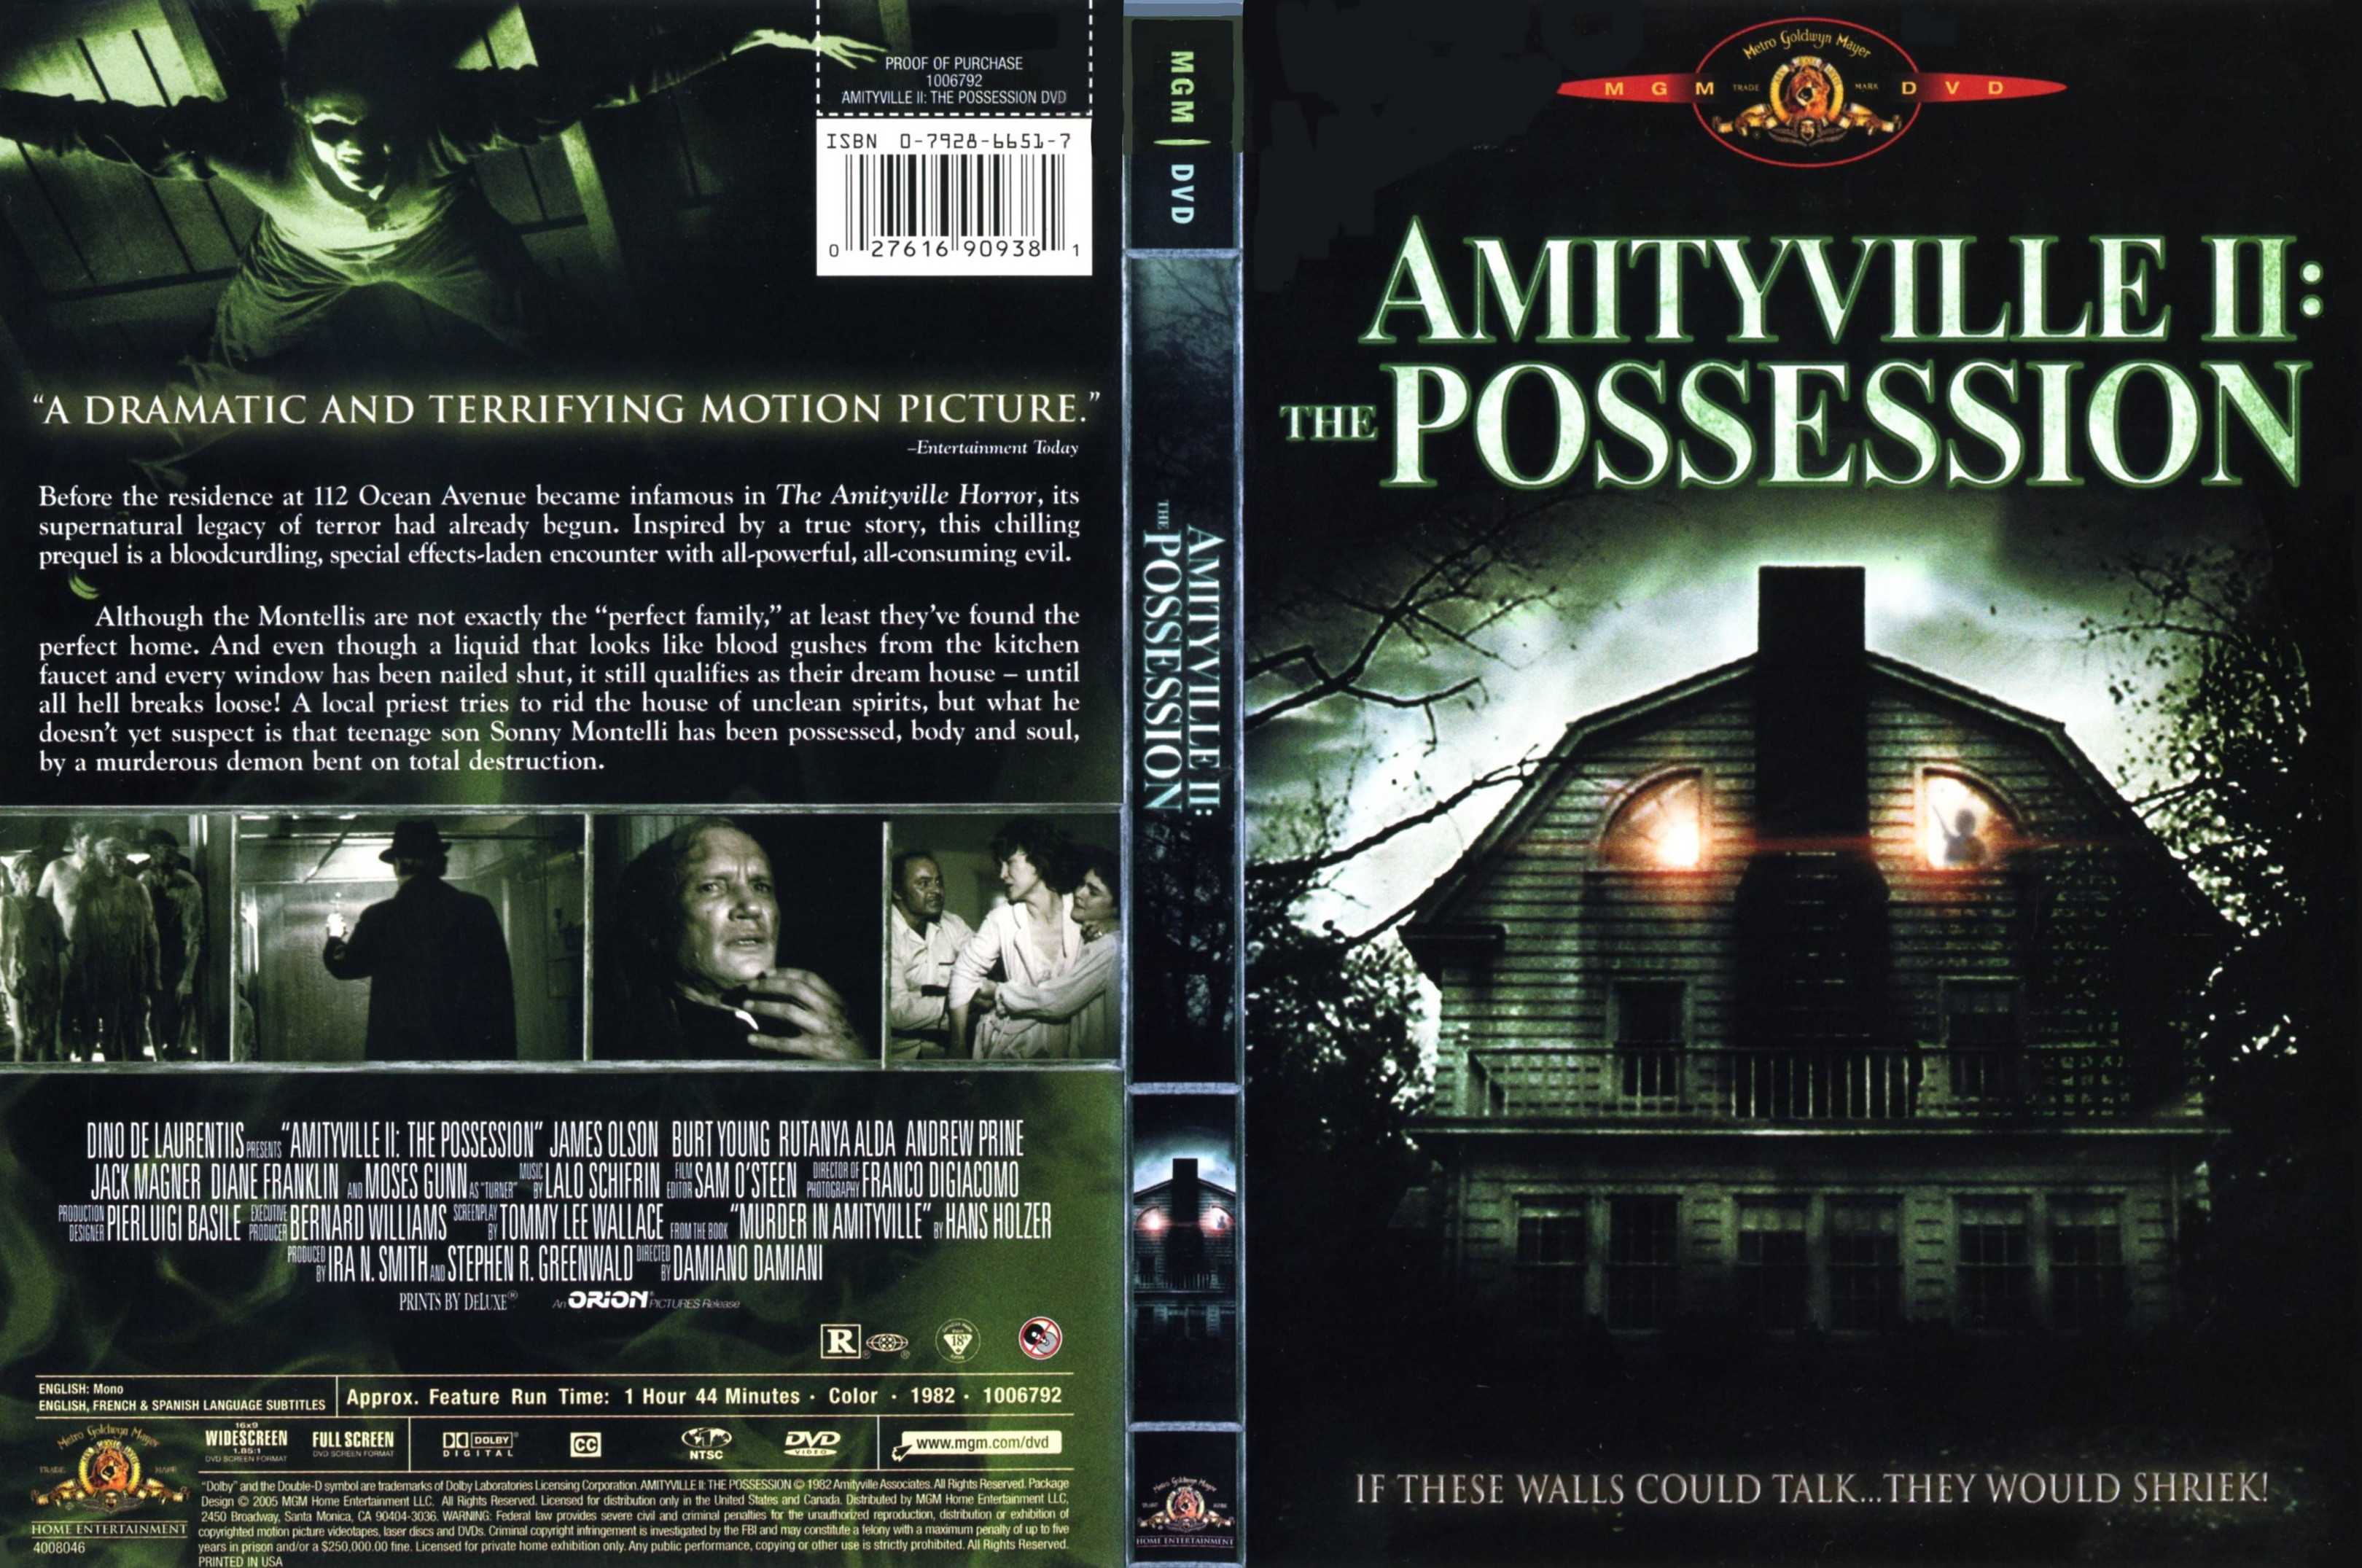 Amityville II: The Possession #10